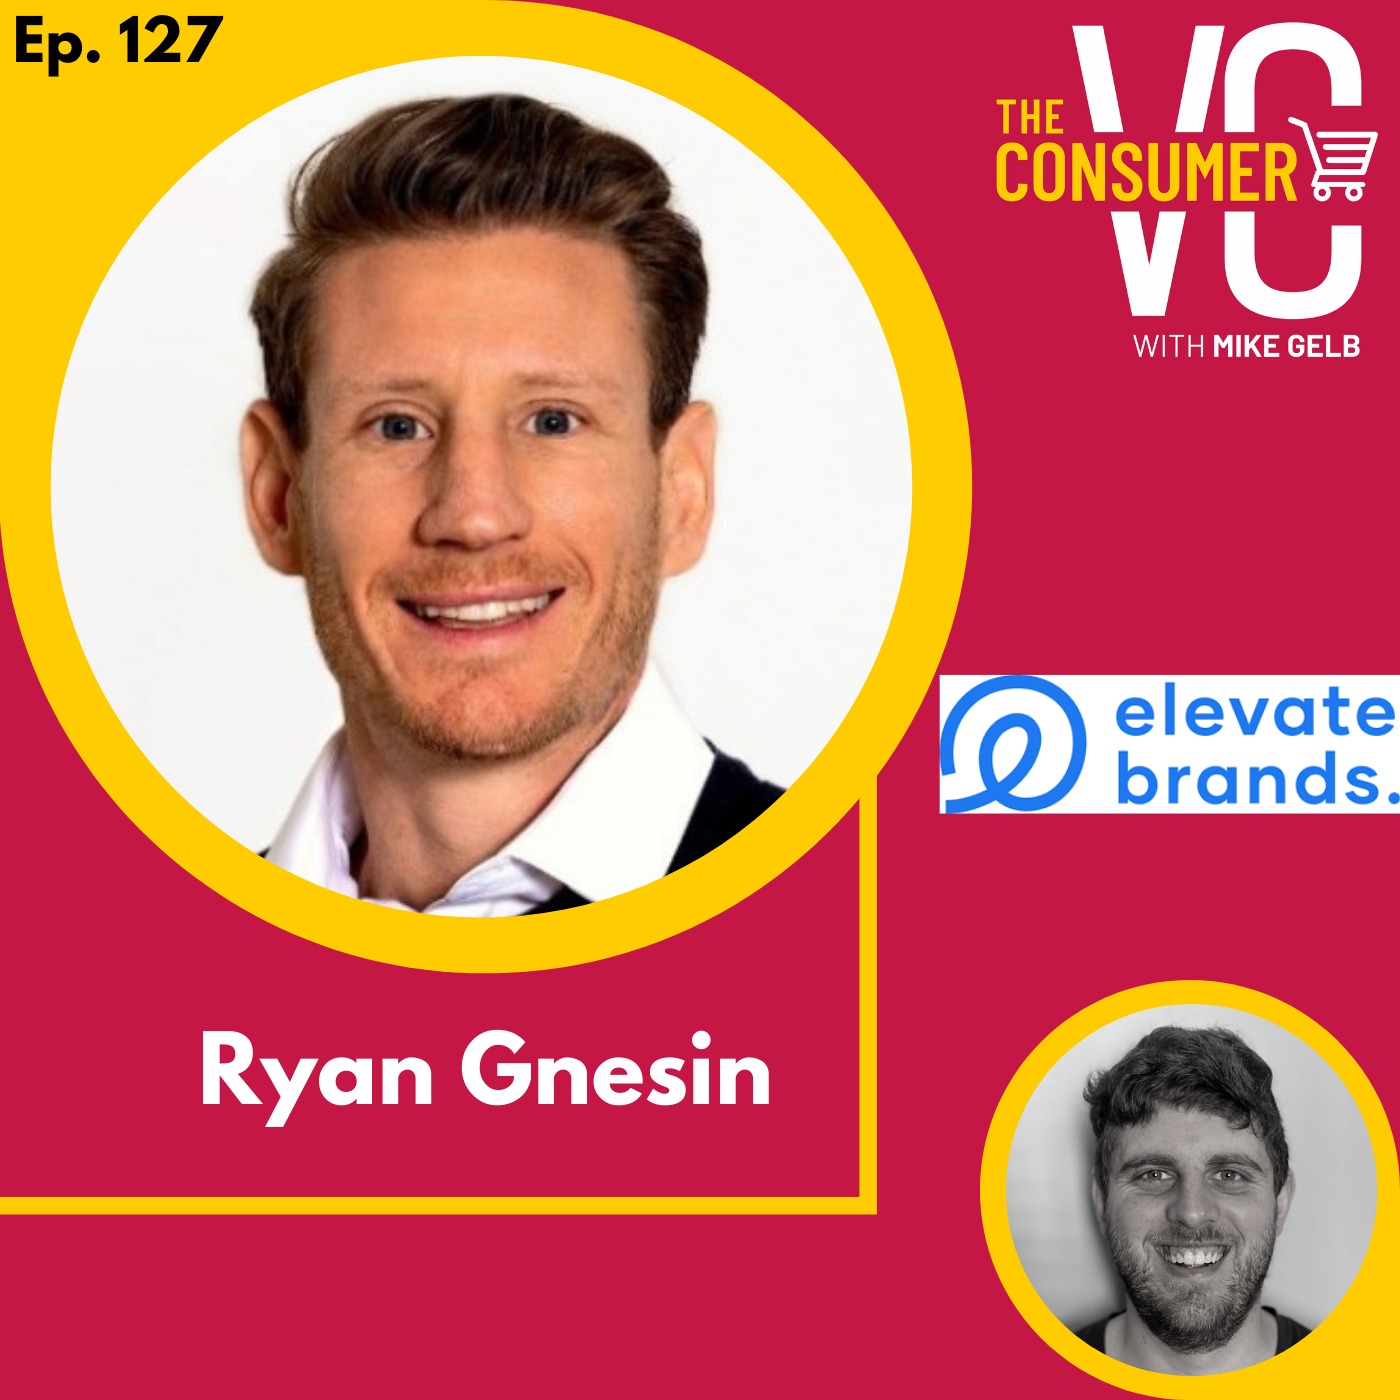 Ryan Gnesin (Elevate Brands) - Investing and Scaling Amazon Brands